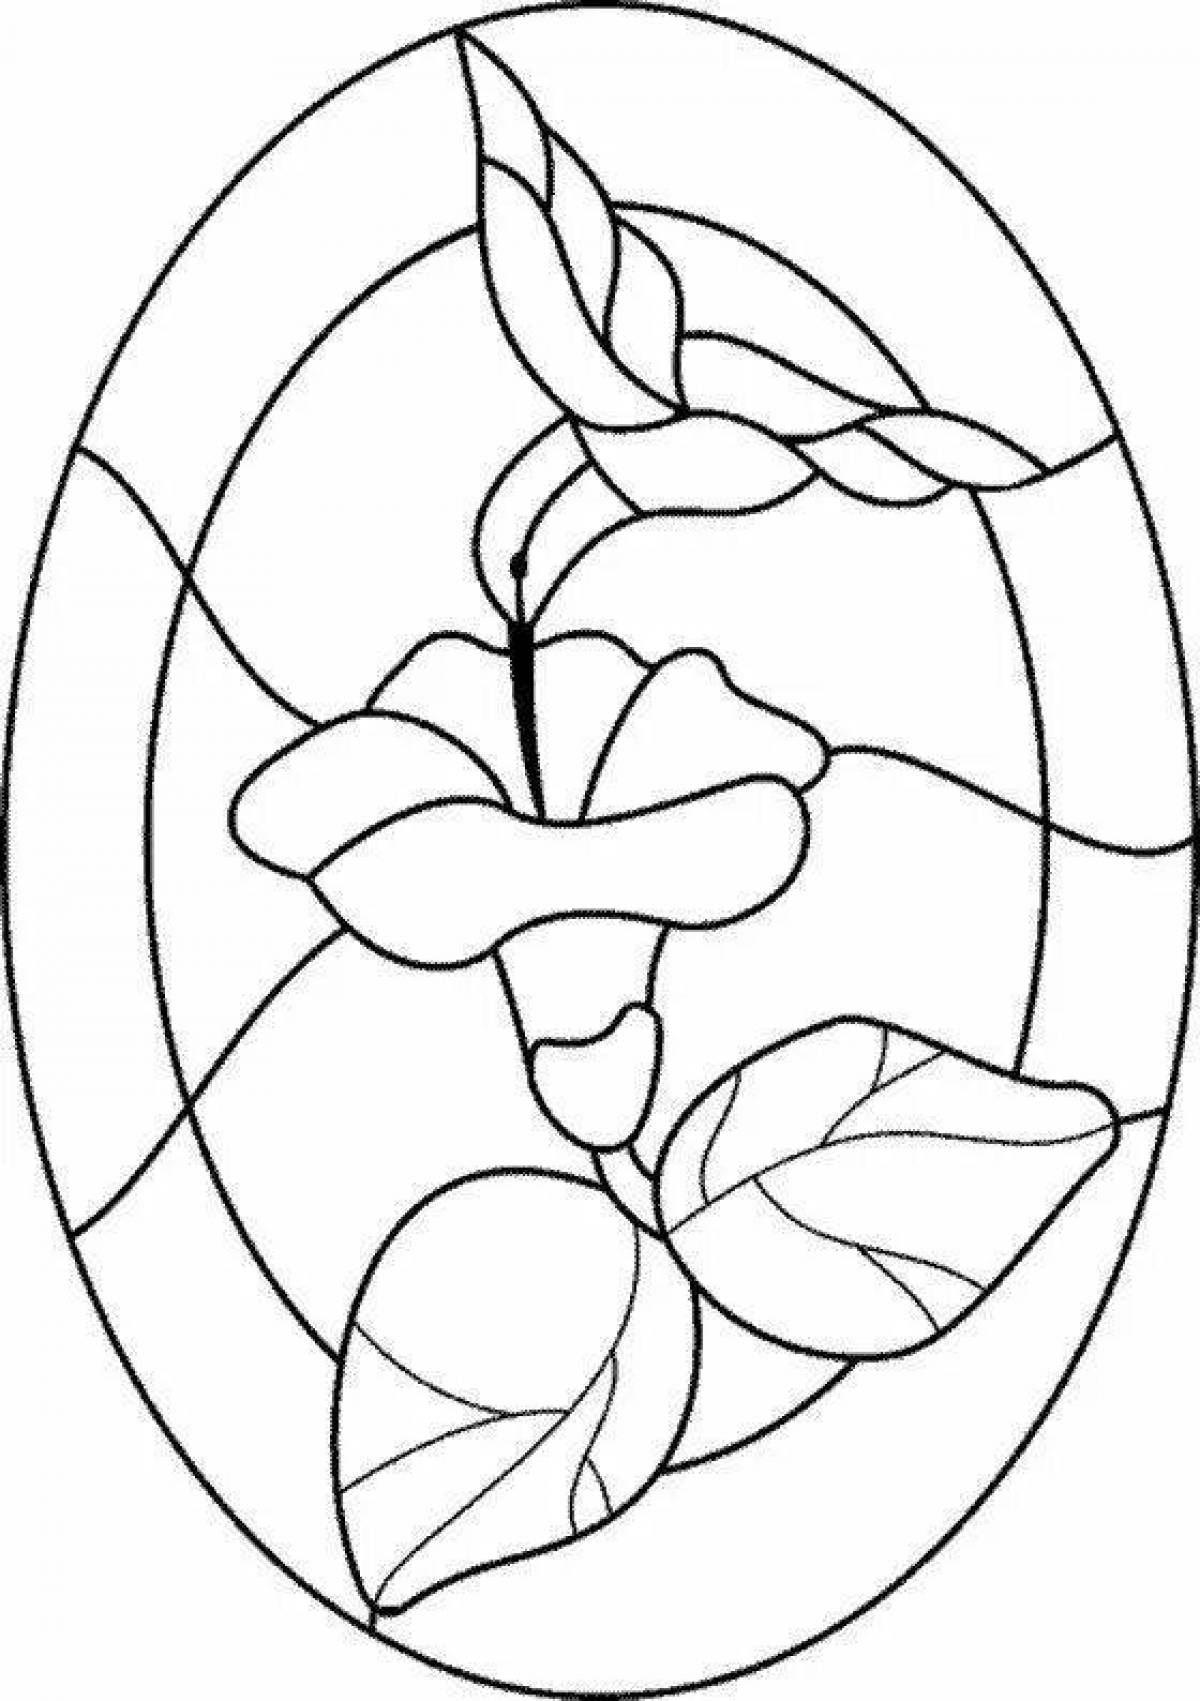 Great stained glass coloring book